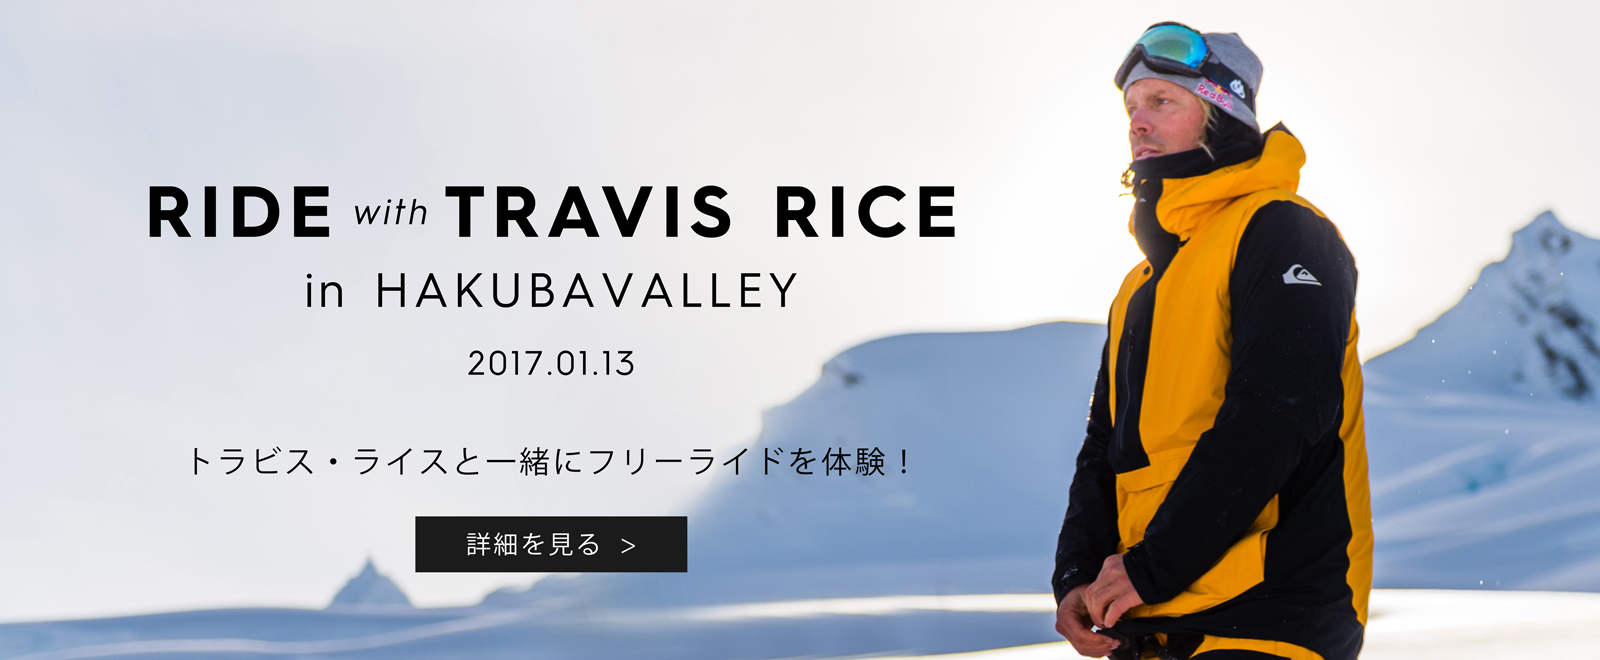 Ride with Travis Rice in HAKUBAVALLEY